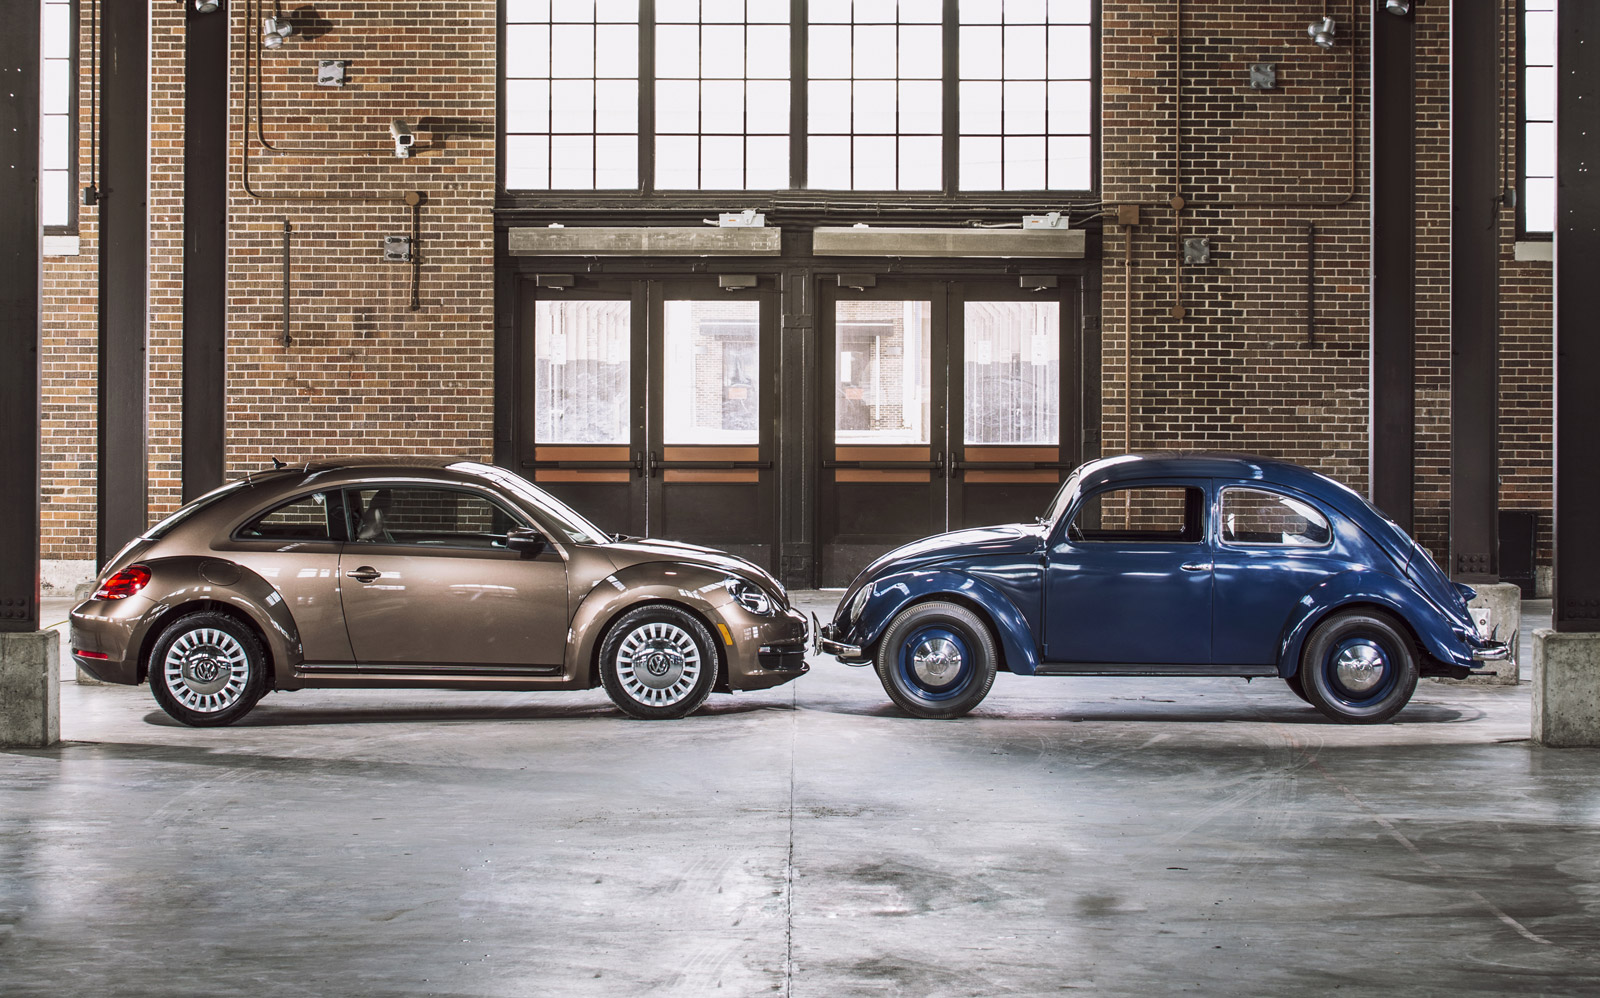 VW Beetle Celebrates 65 Years In U.S. (With A Few Missing)